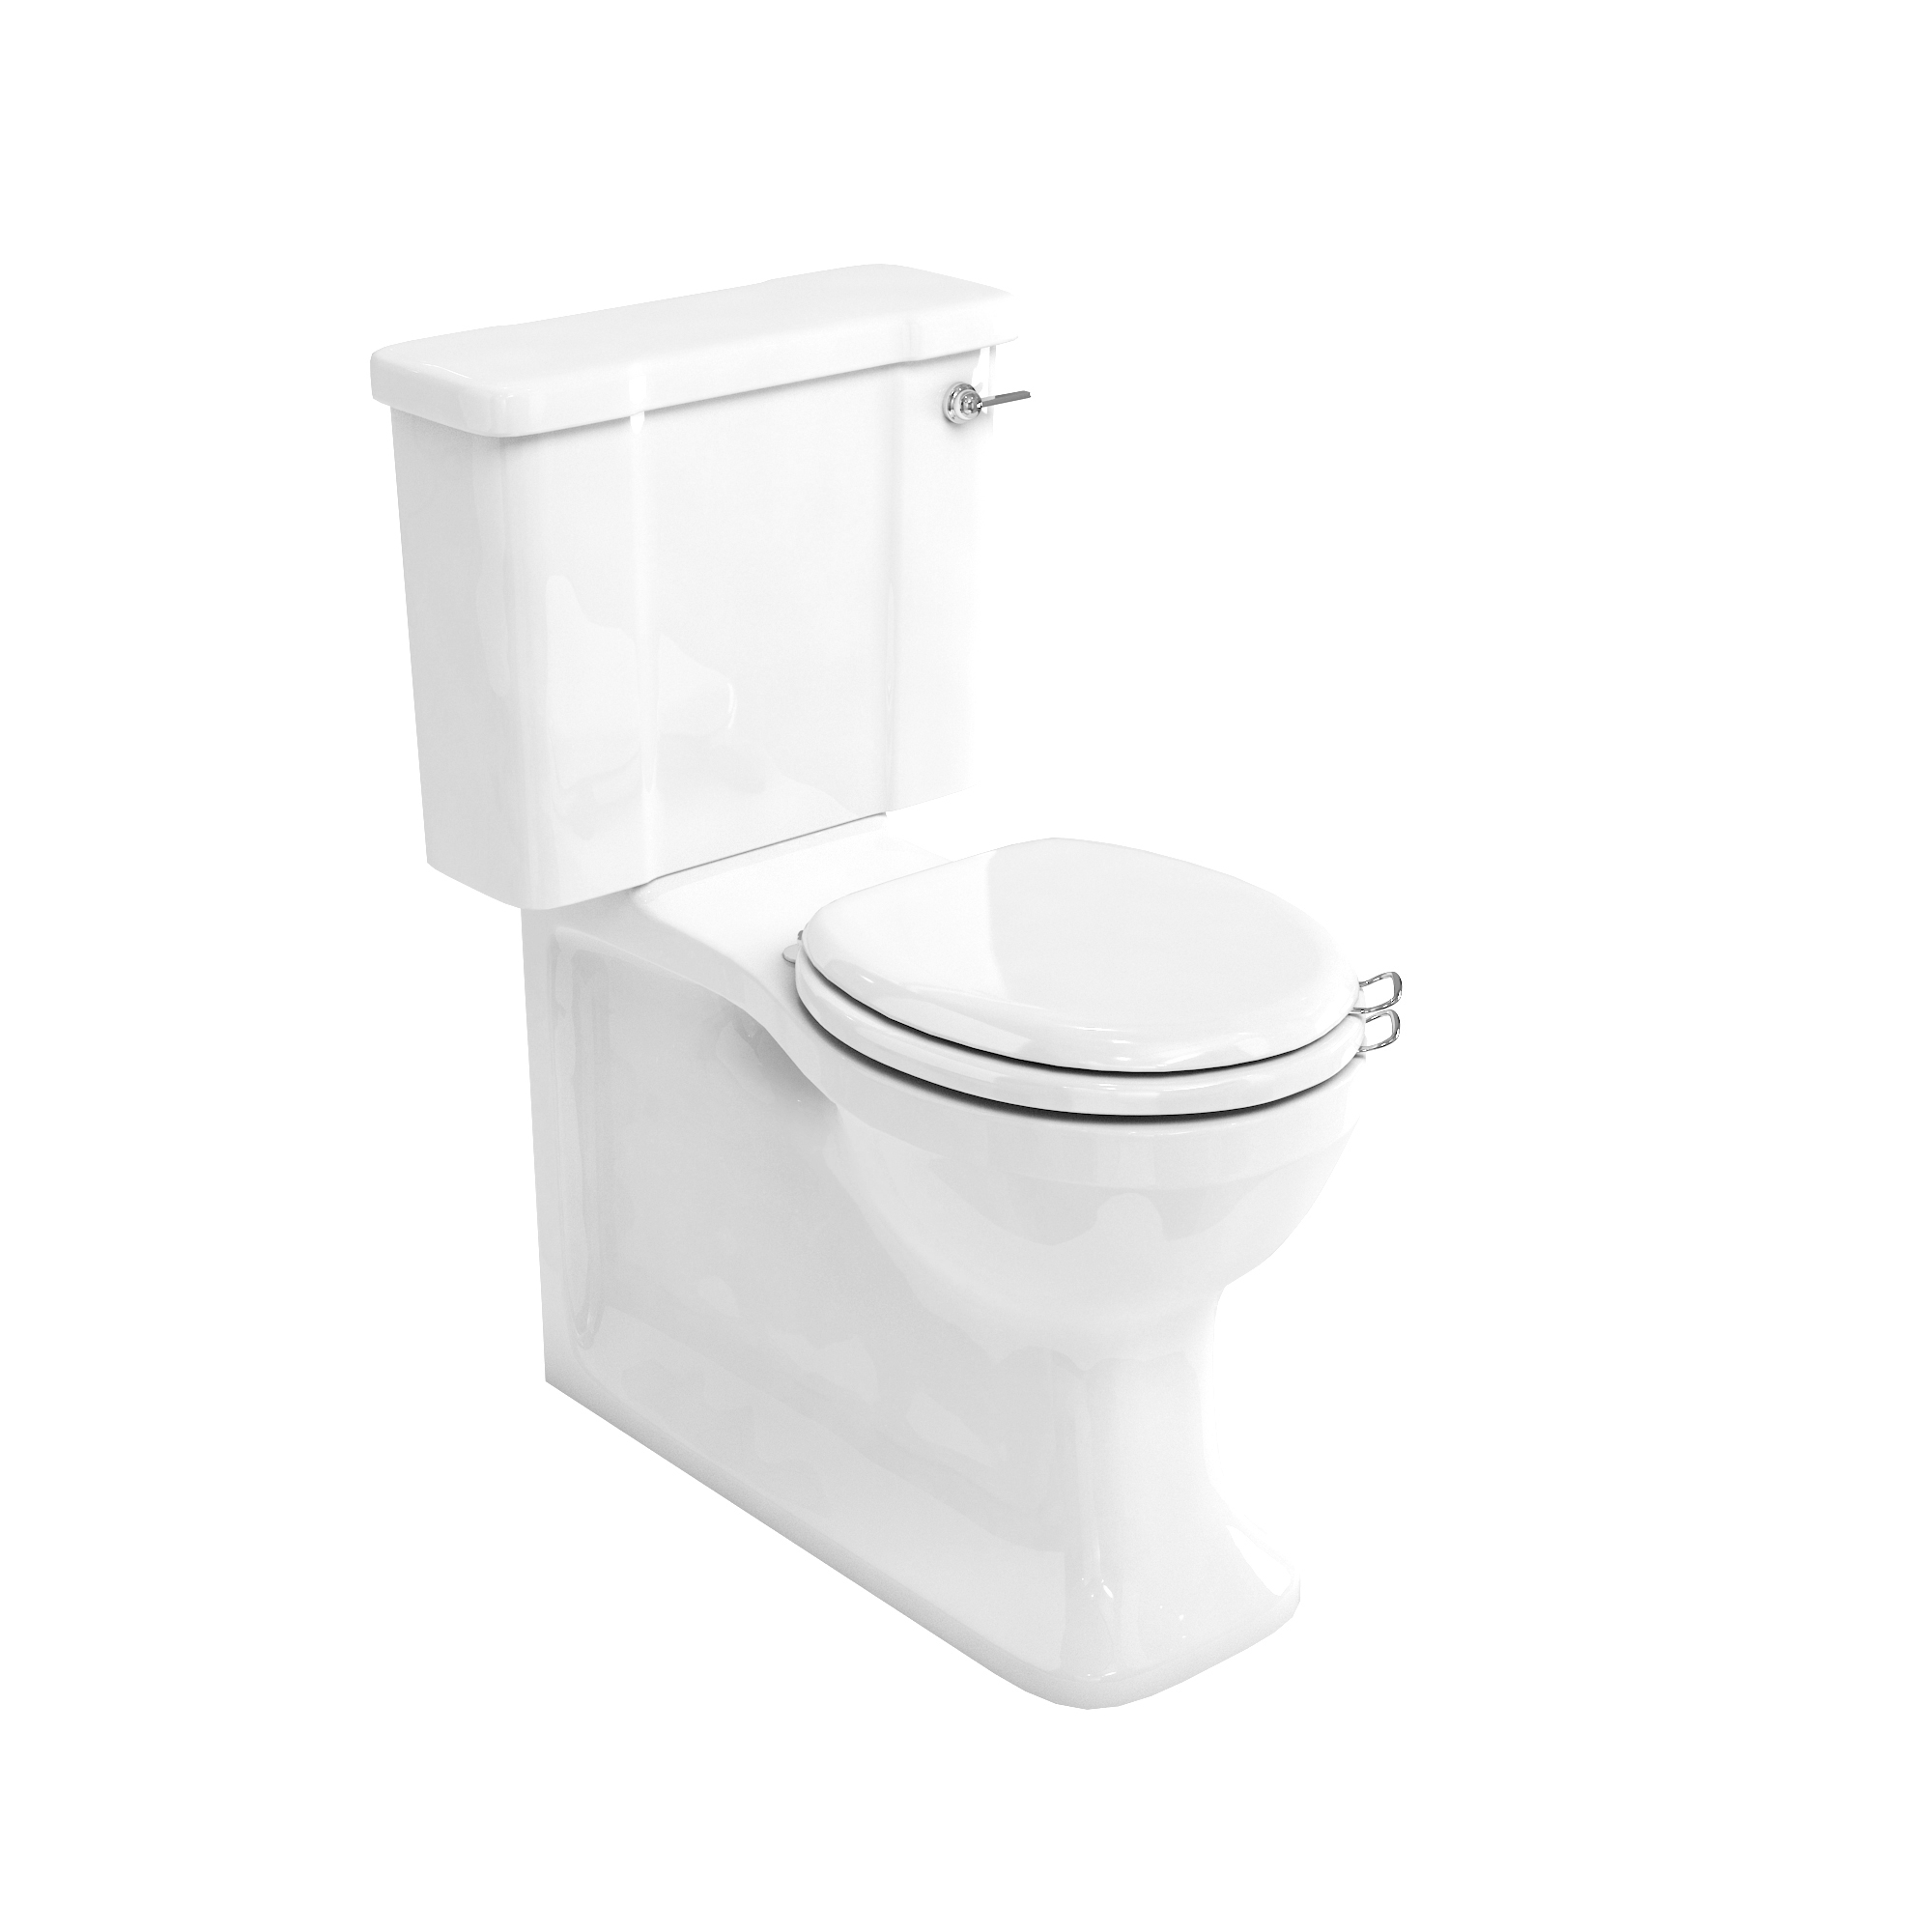 Arcade Full back-to-wall close coupled pan and dual flush cistern - chrome